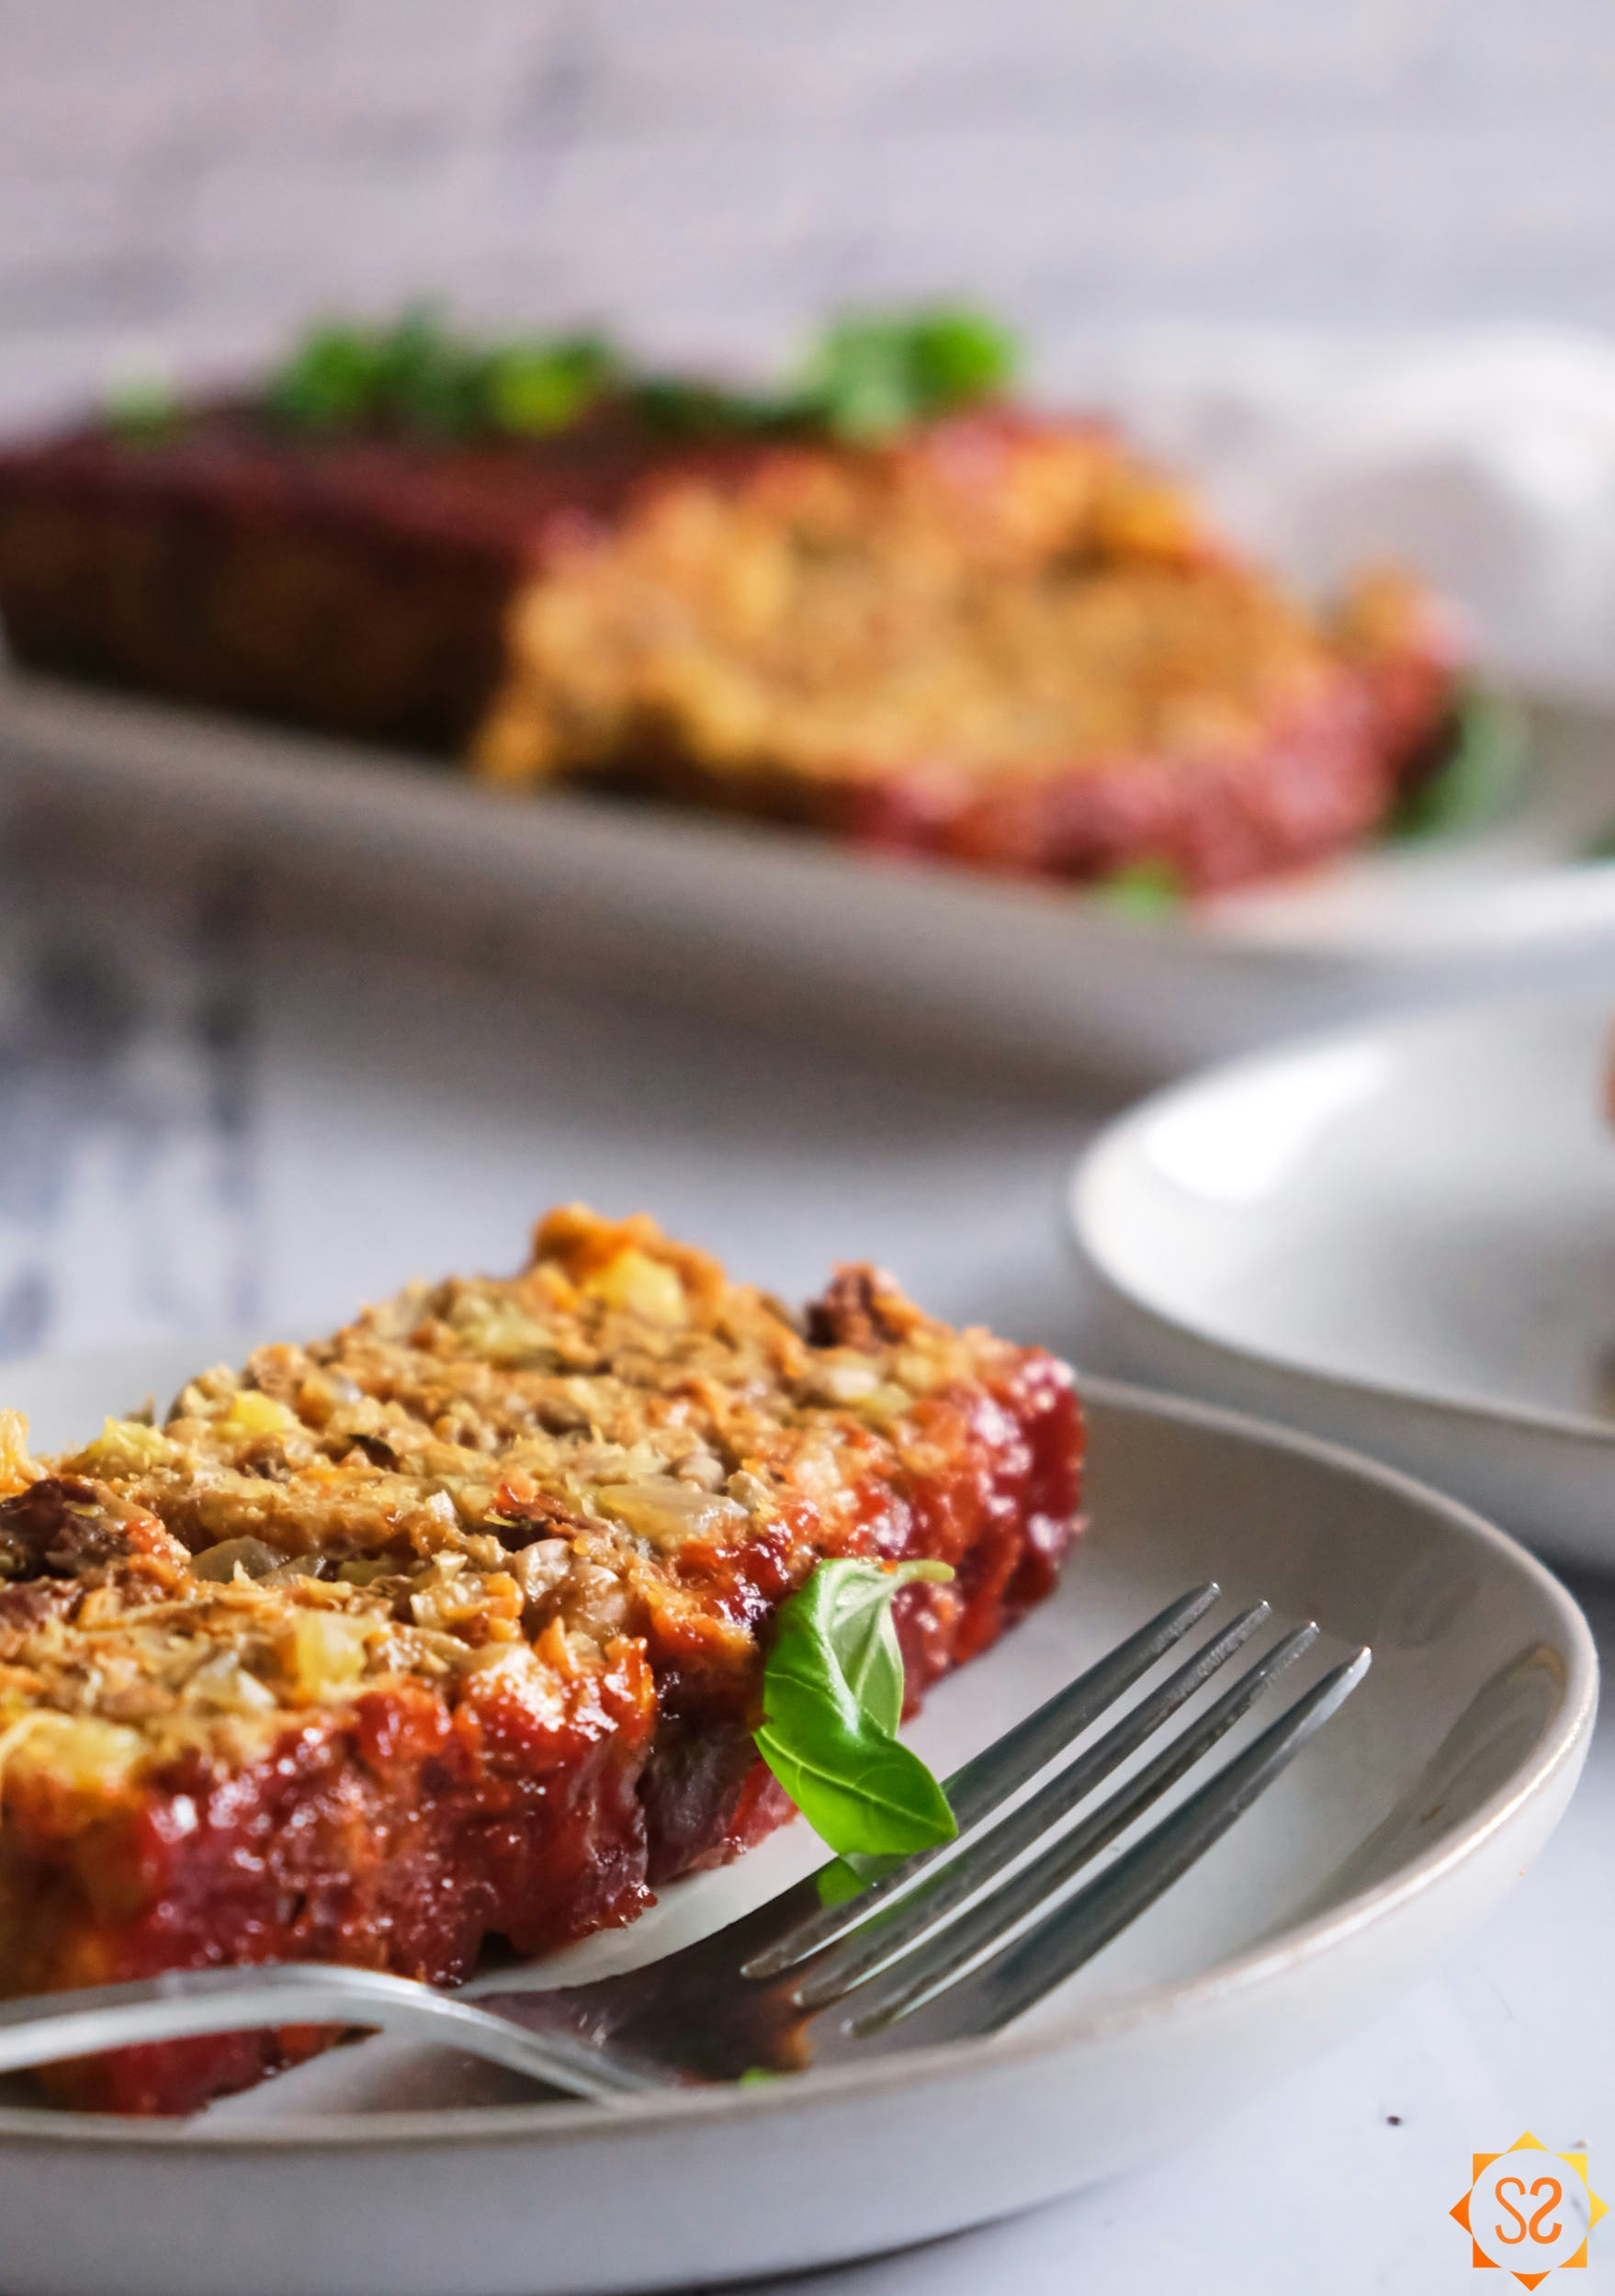 A slice of lentil loaf on a plate with a fork, with the full loaf in the background